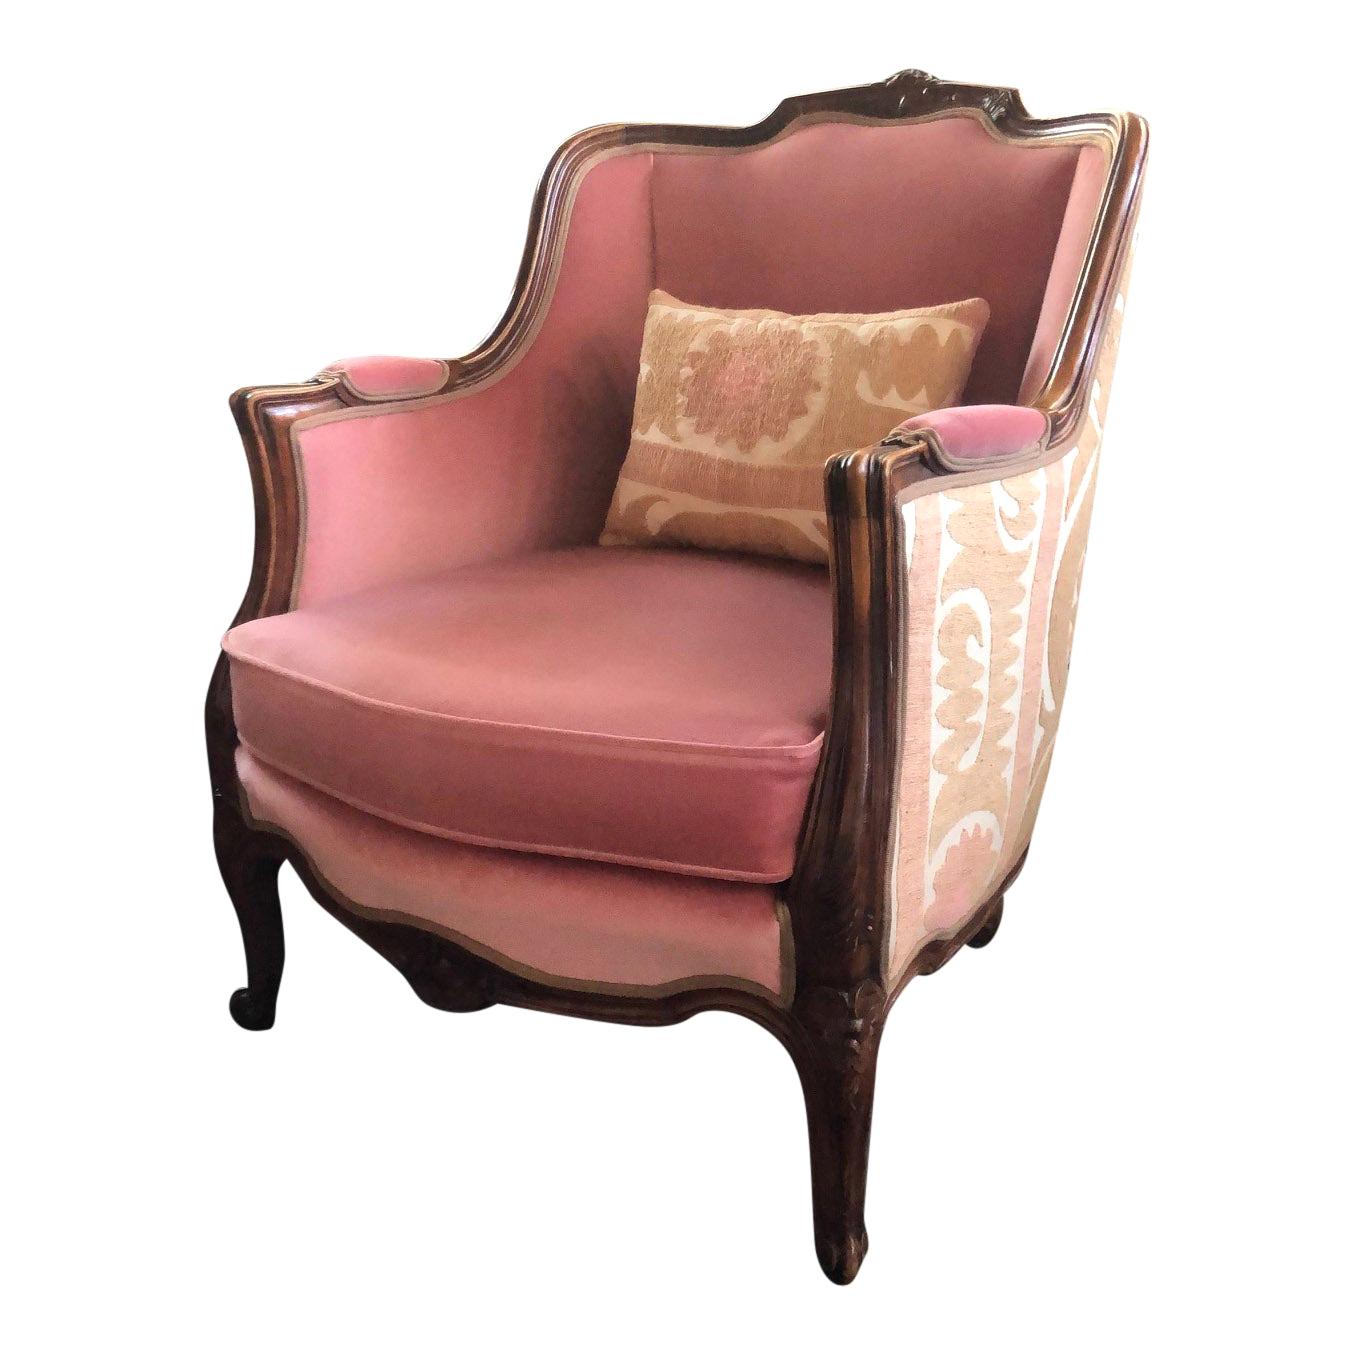 Louis XV Bergère Style Chair 20th Century with Pink Velvet Fabric and Suzani